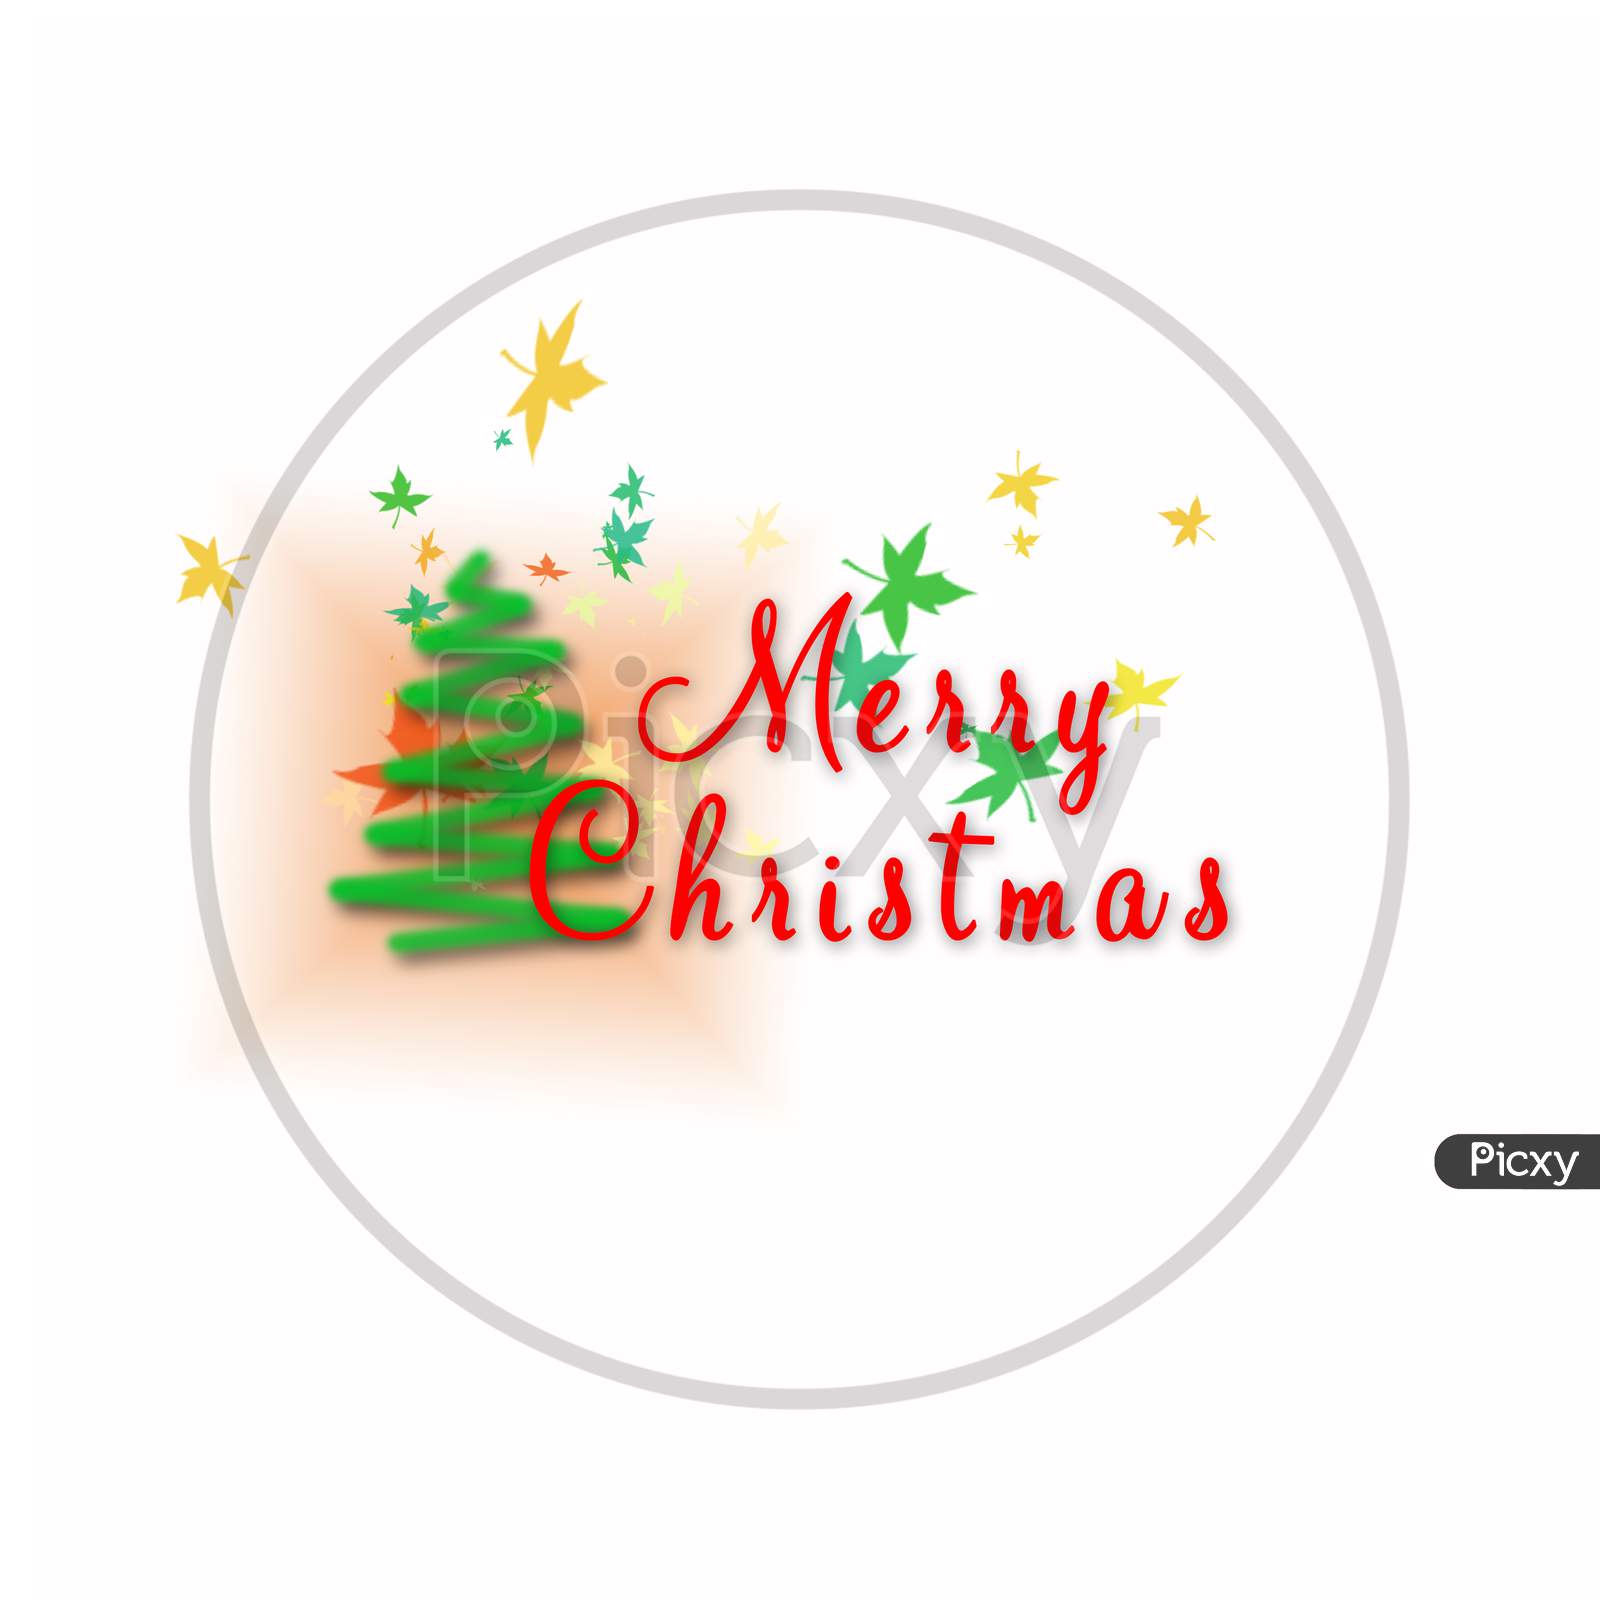 Merry Christmas  Lettering Design Card Template And Creative Typography For Holiday Greeting Gift Poster.